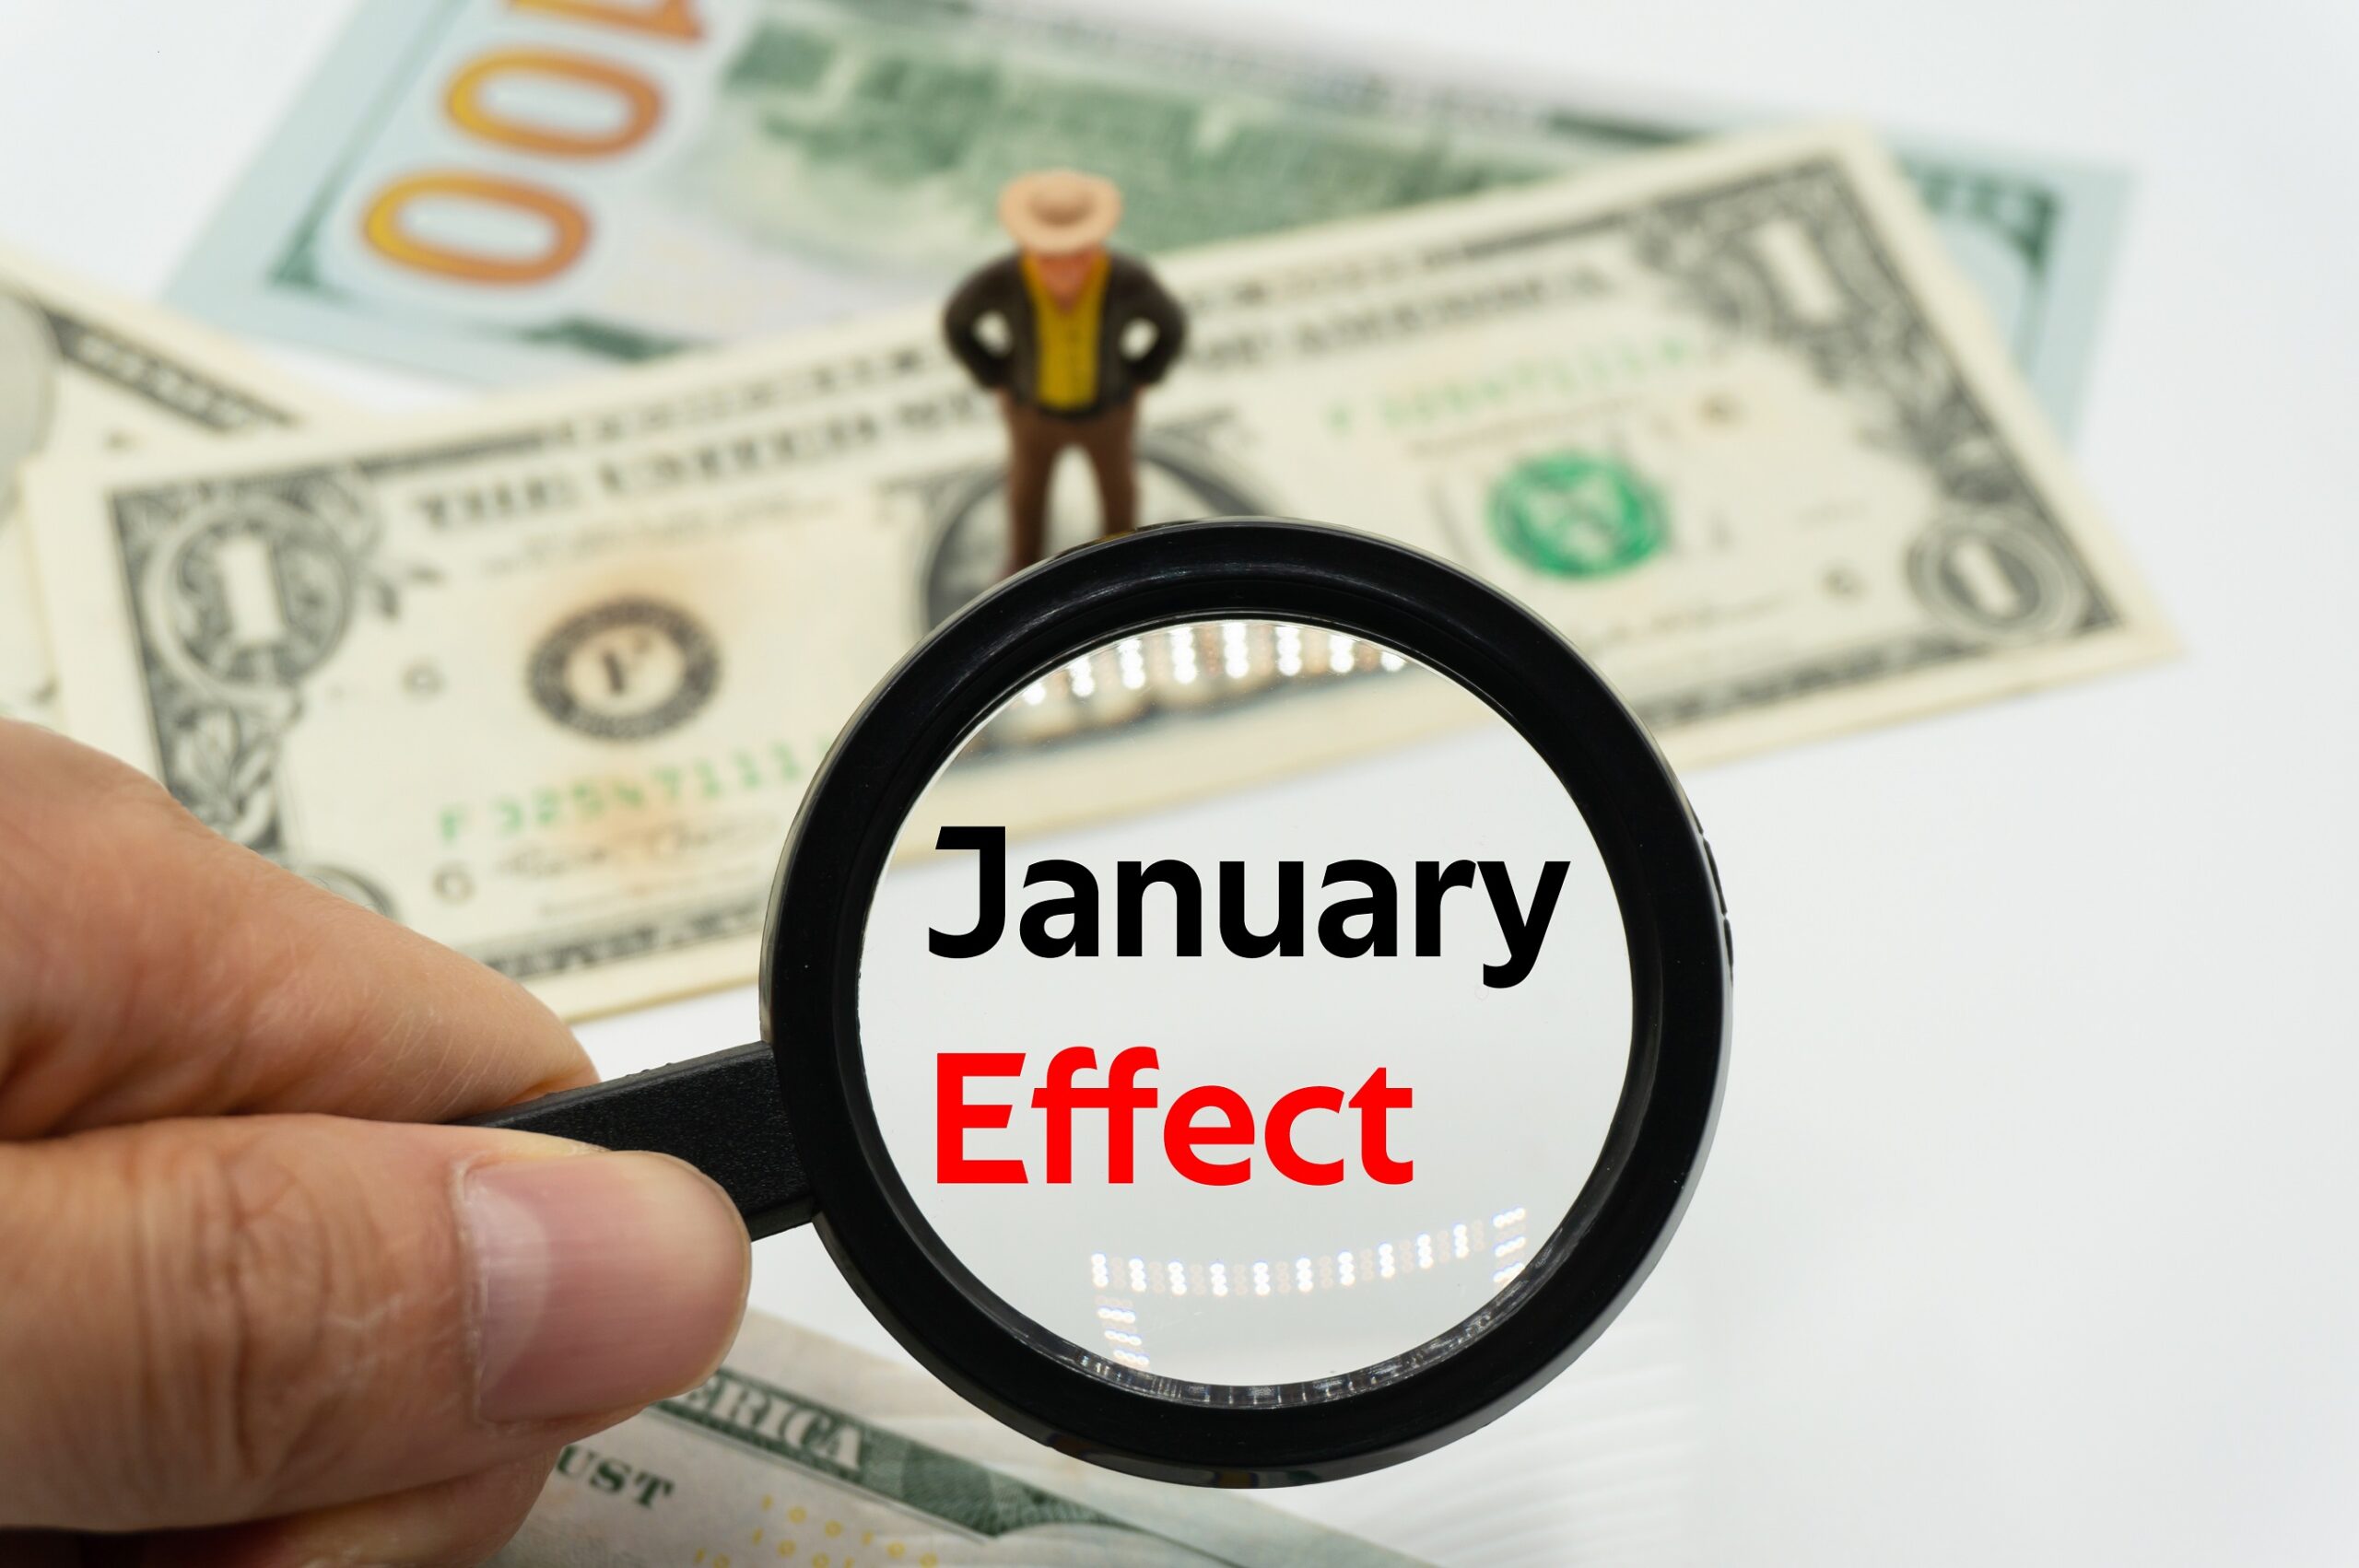 The "January Effect"